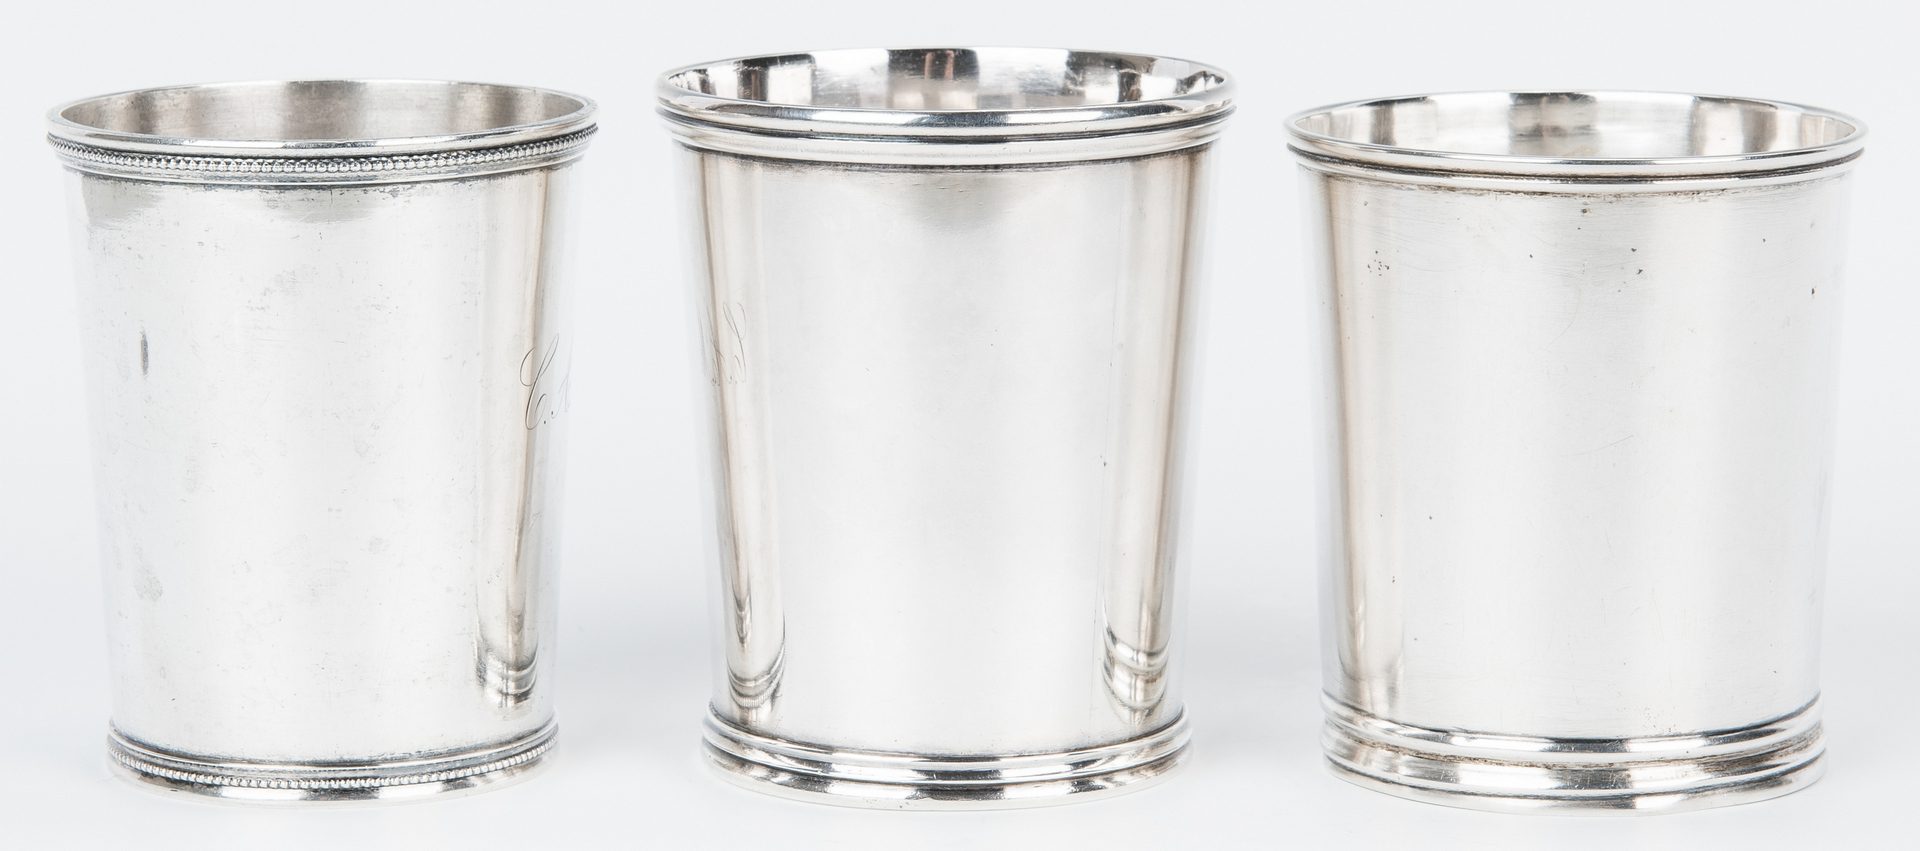 Lot 83: 3 Jaccard St. Louis Coin Silver Julep Cups